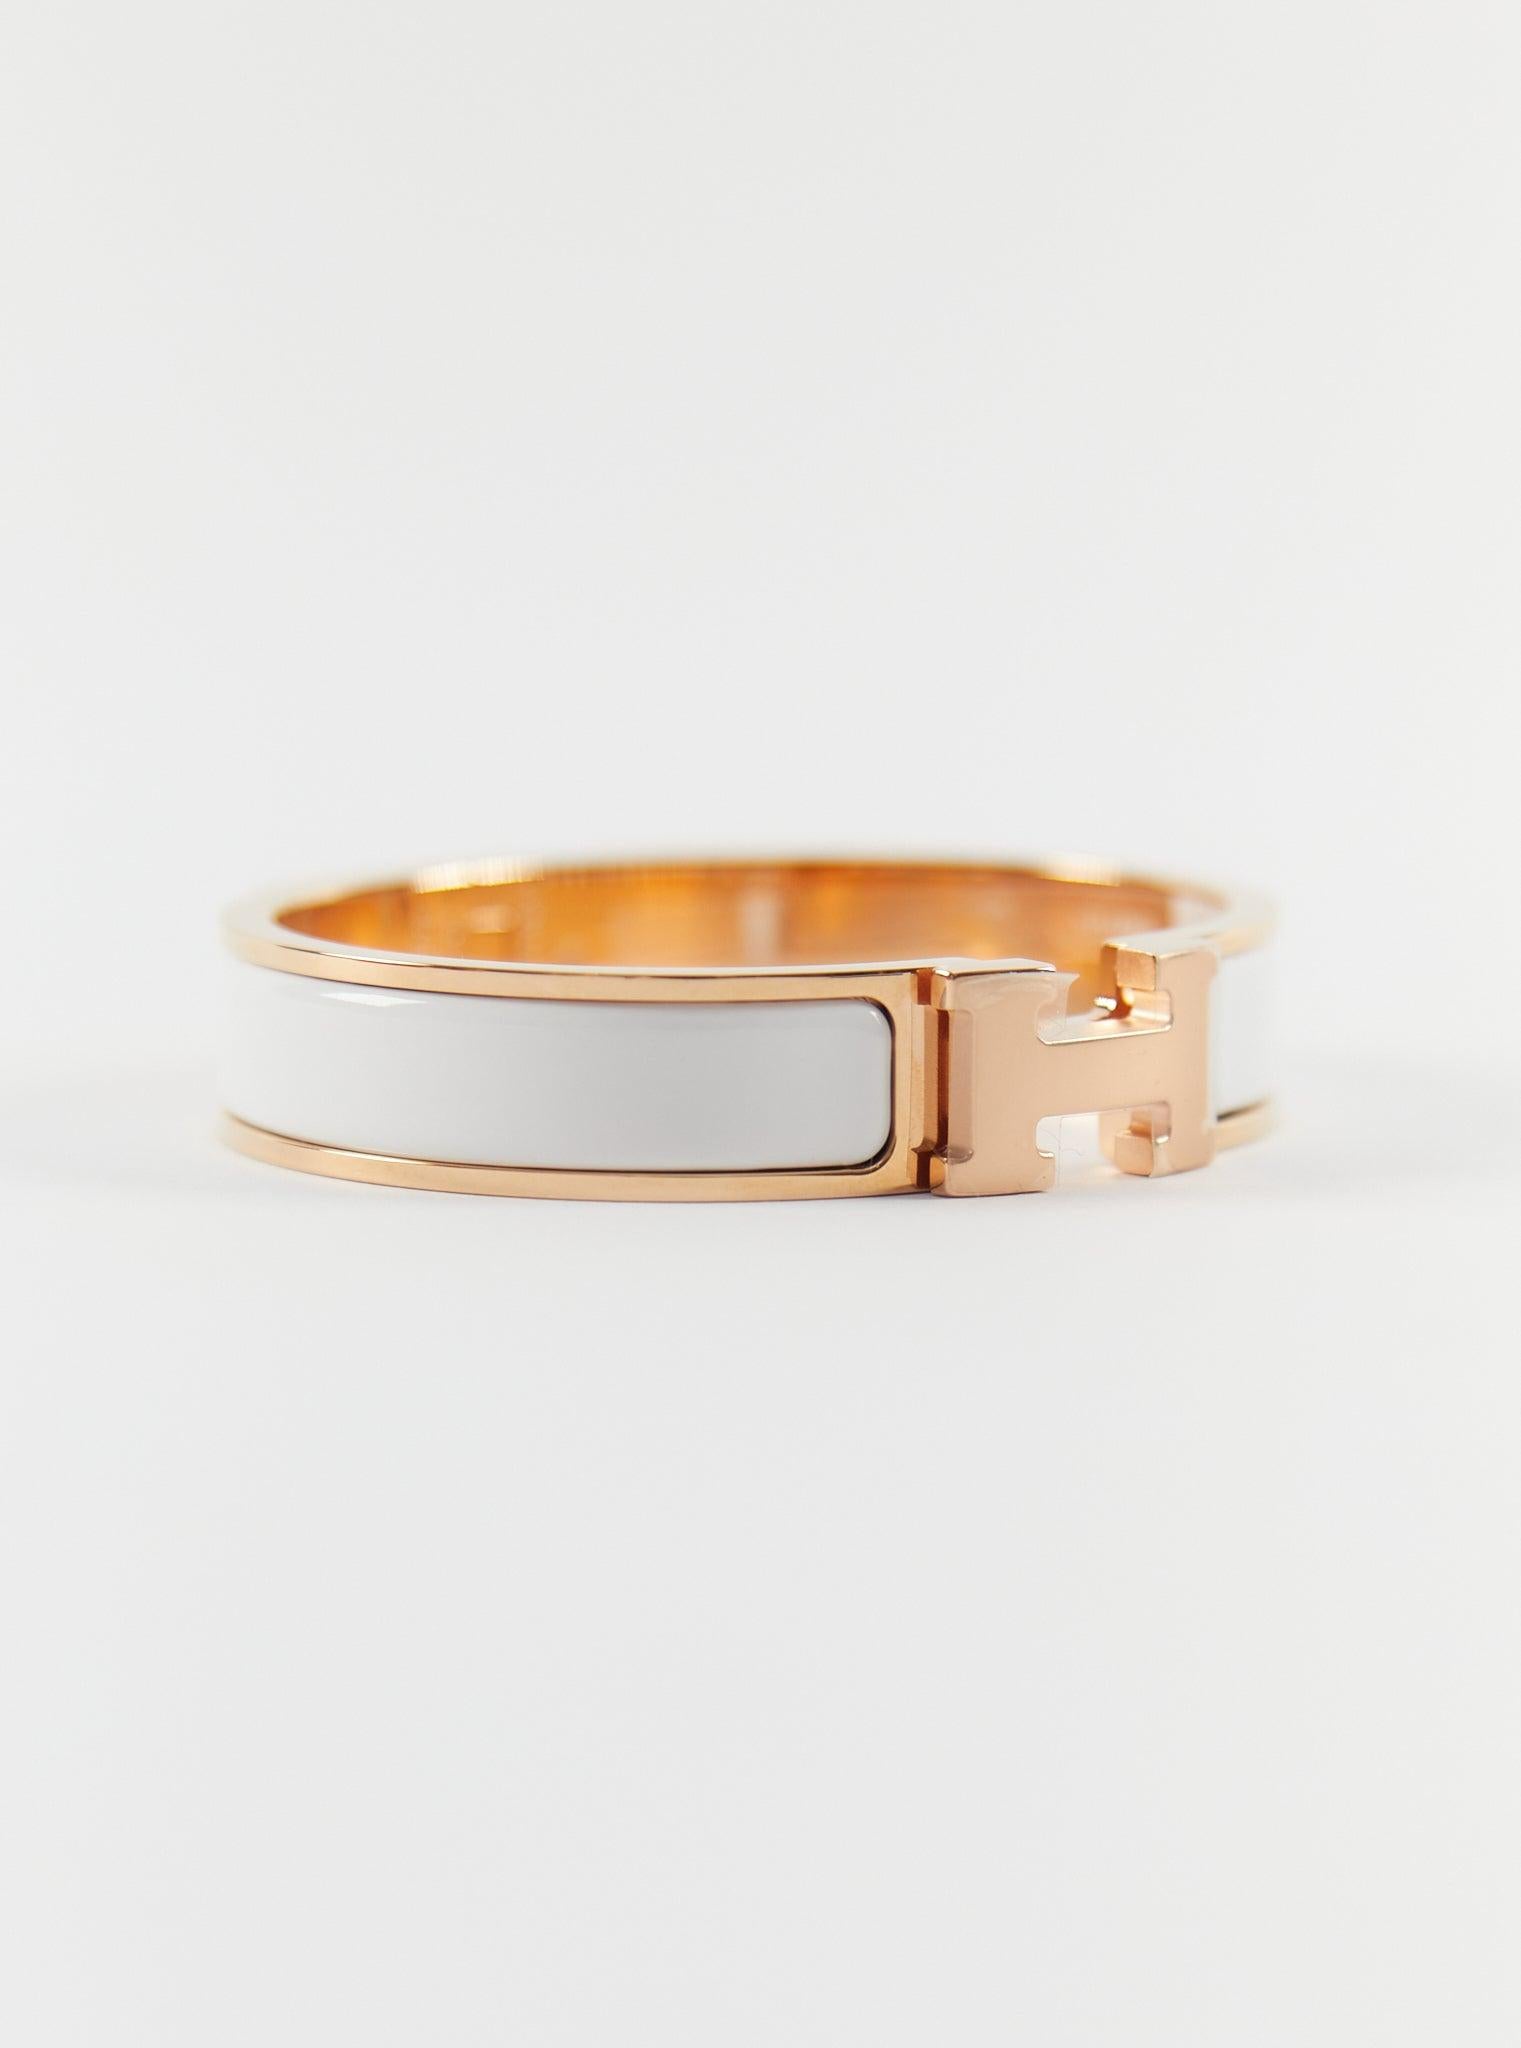 Hermès Clic H PM Bracelet in White and Rose Gold

Wrist size: 16.8 cm  Width: 12 mm

Made in France